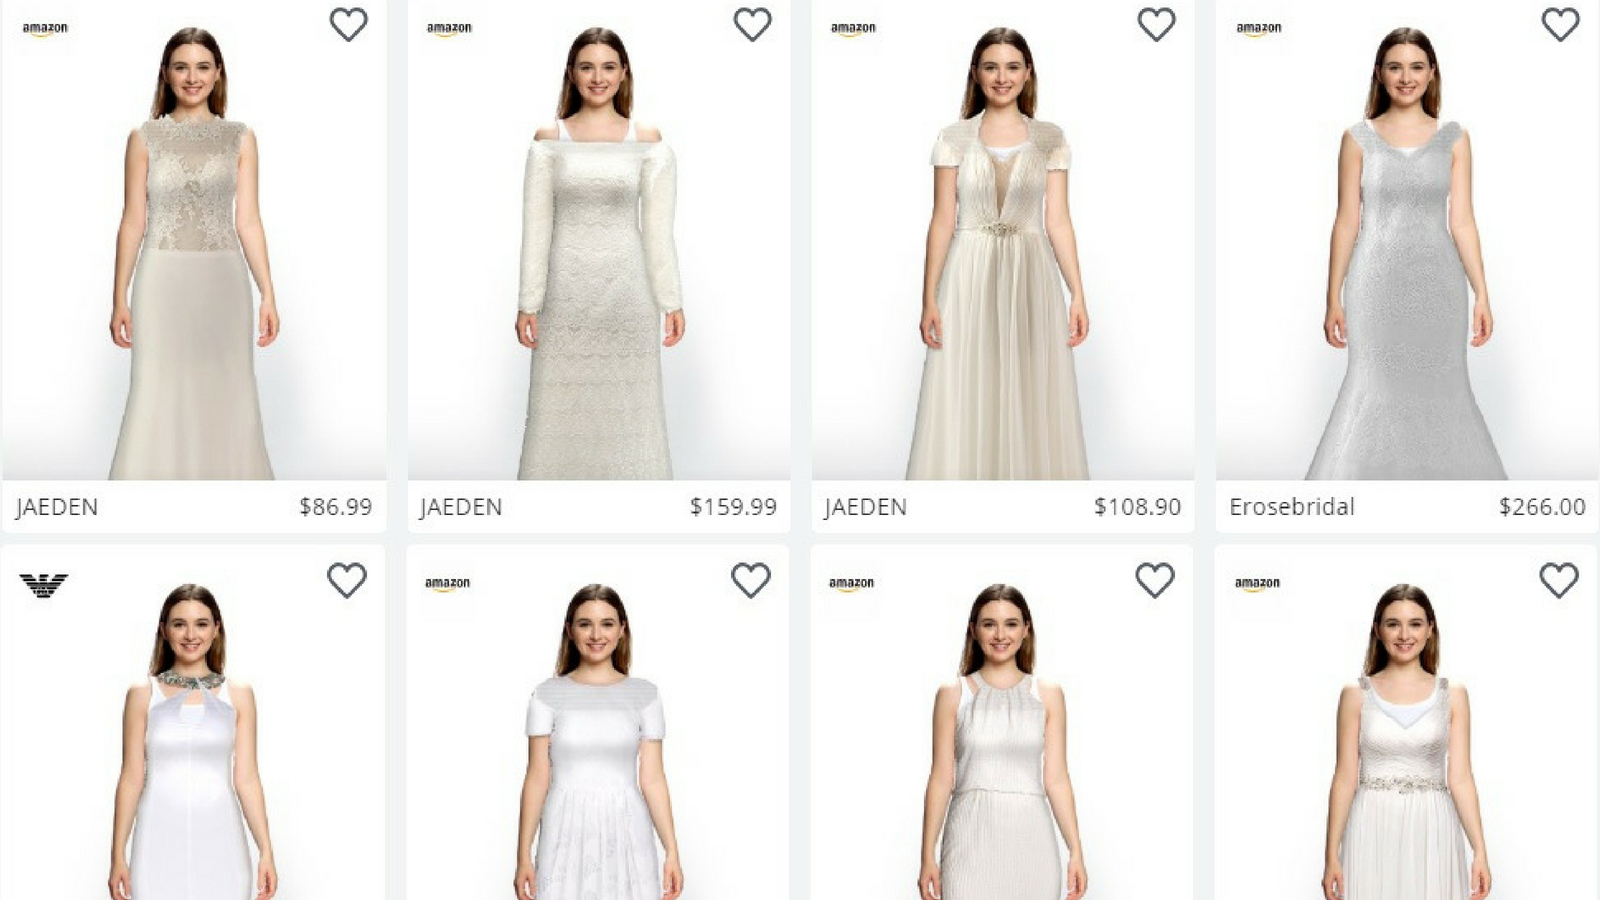 A collection of bridal gowns available for virtual try on in the Zeekit app. Photo courtesy